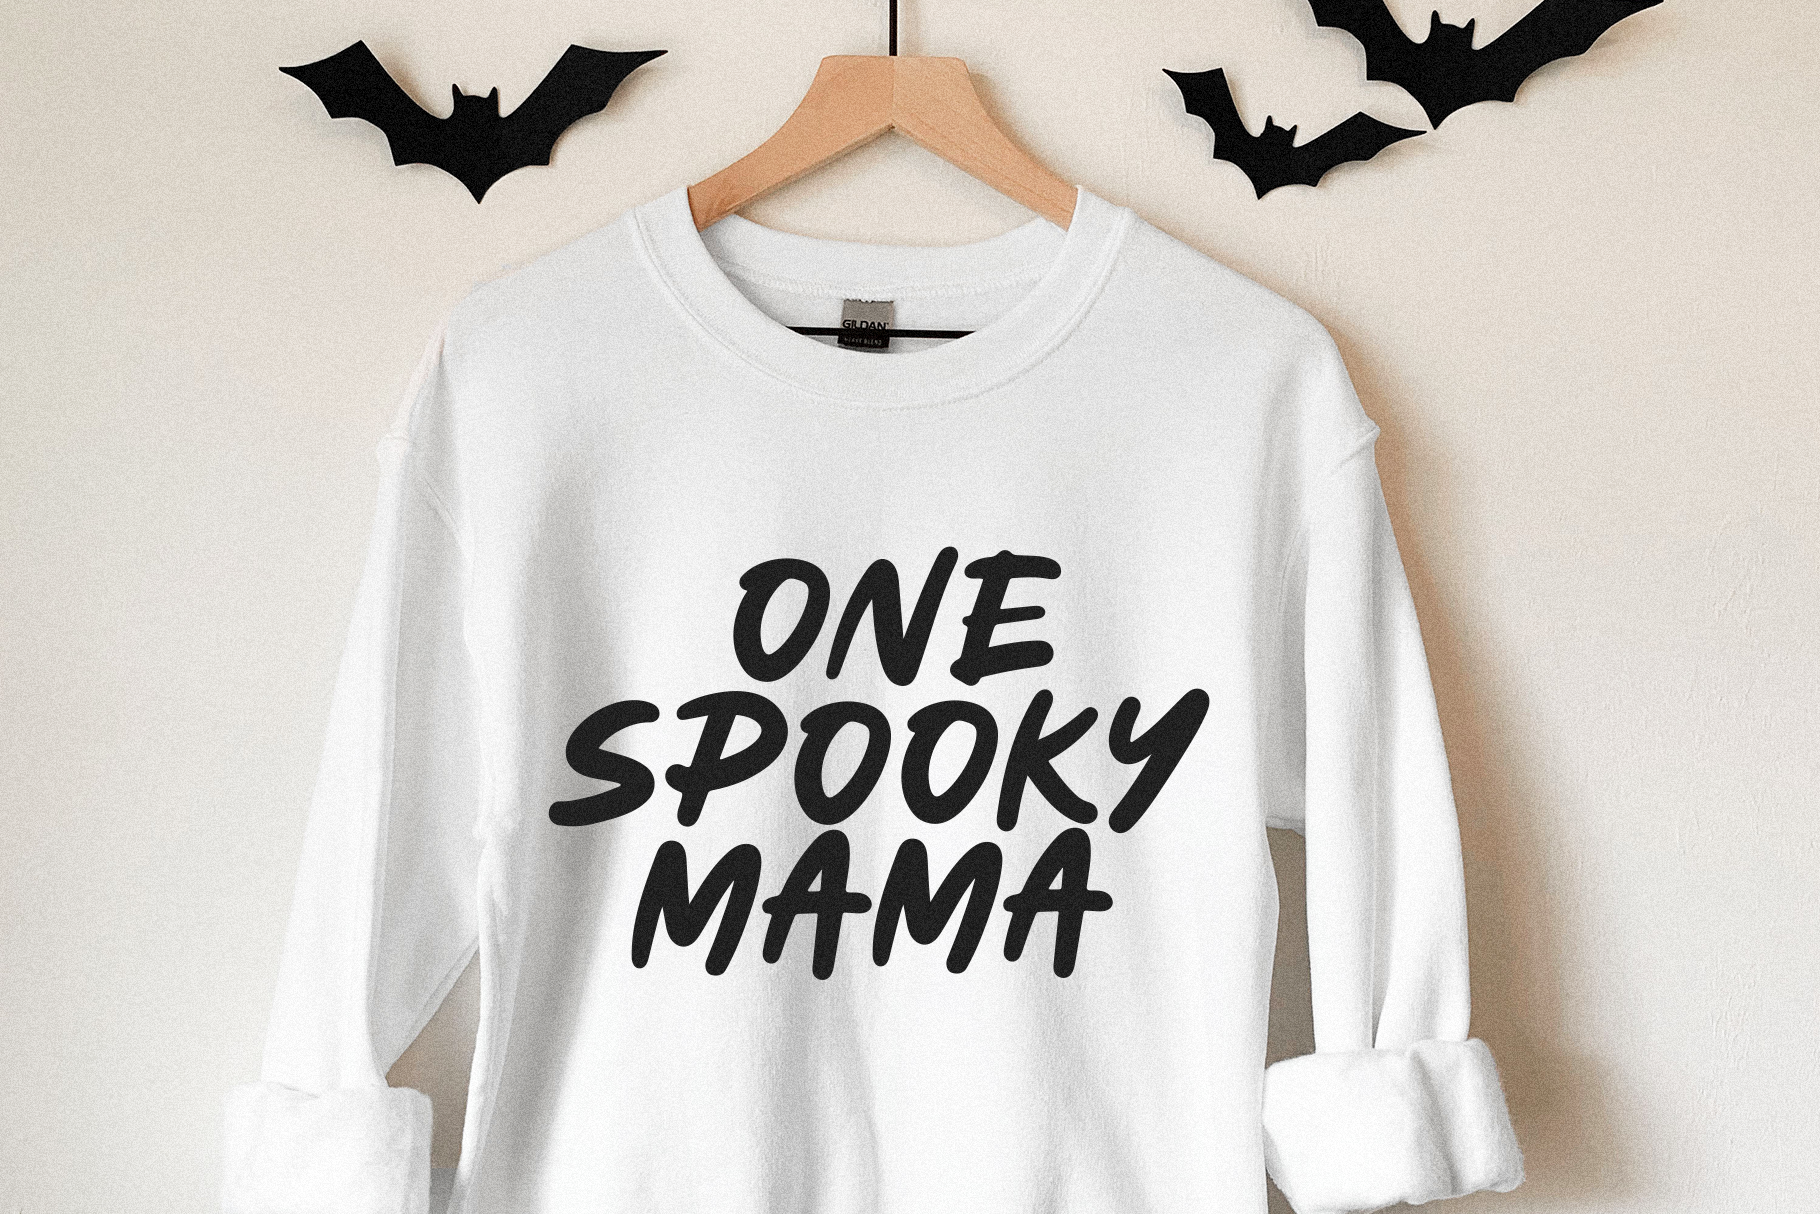 Spooky Halloween Tshirt Design With Ghost Bats And Typography